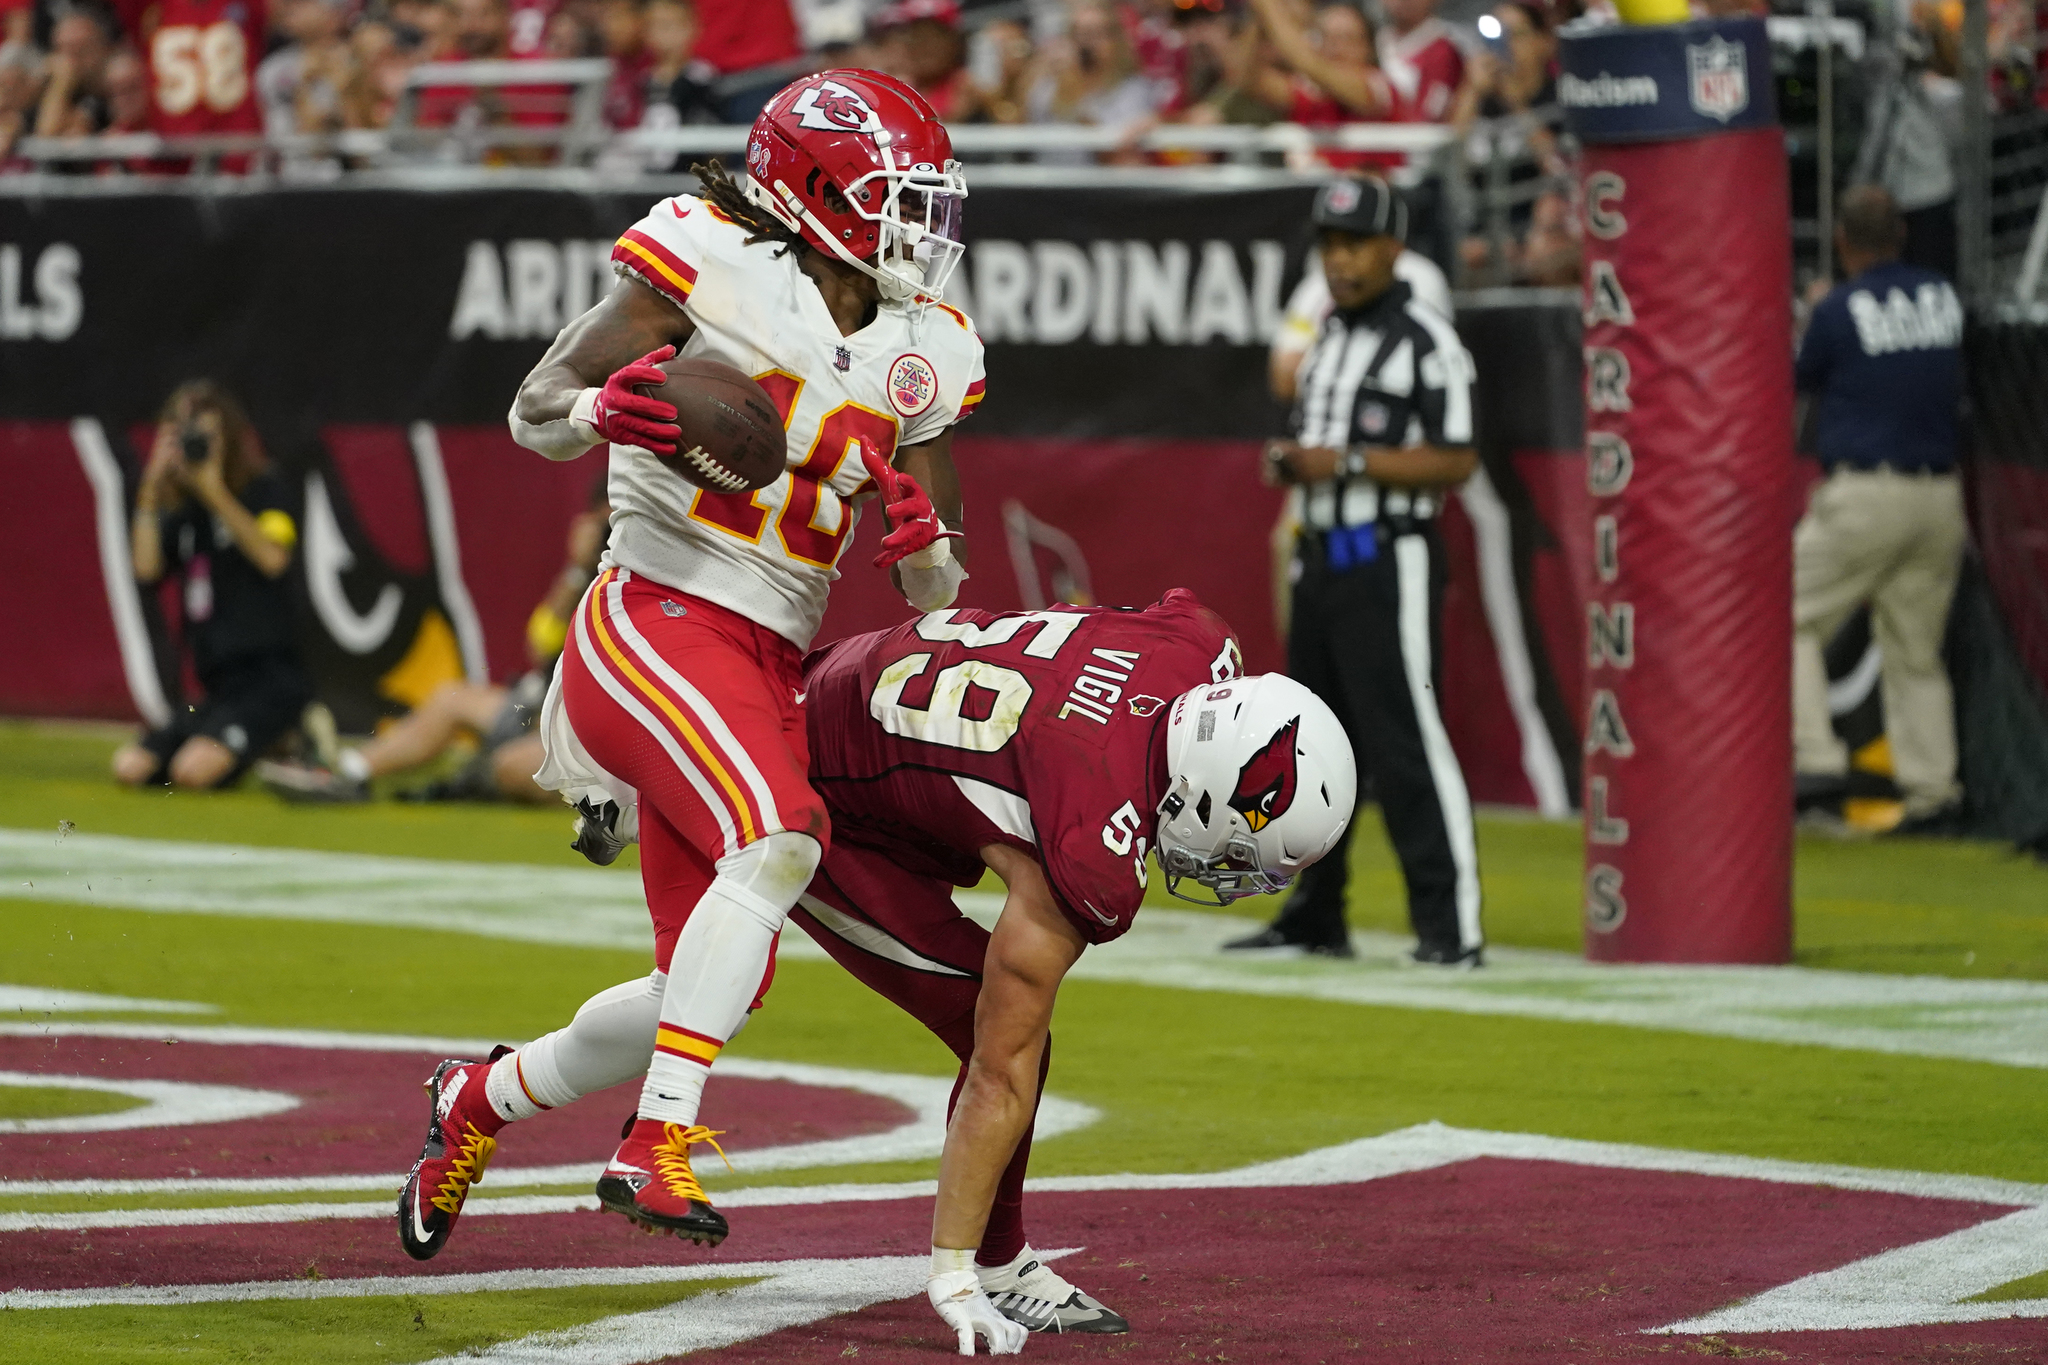 How to Watch Chiefs vs. Cardinals NFL Preseason Game Online: TV Channel,  Streaming, Time